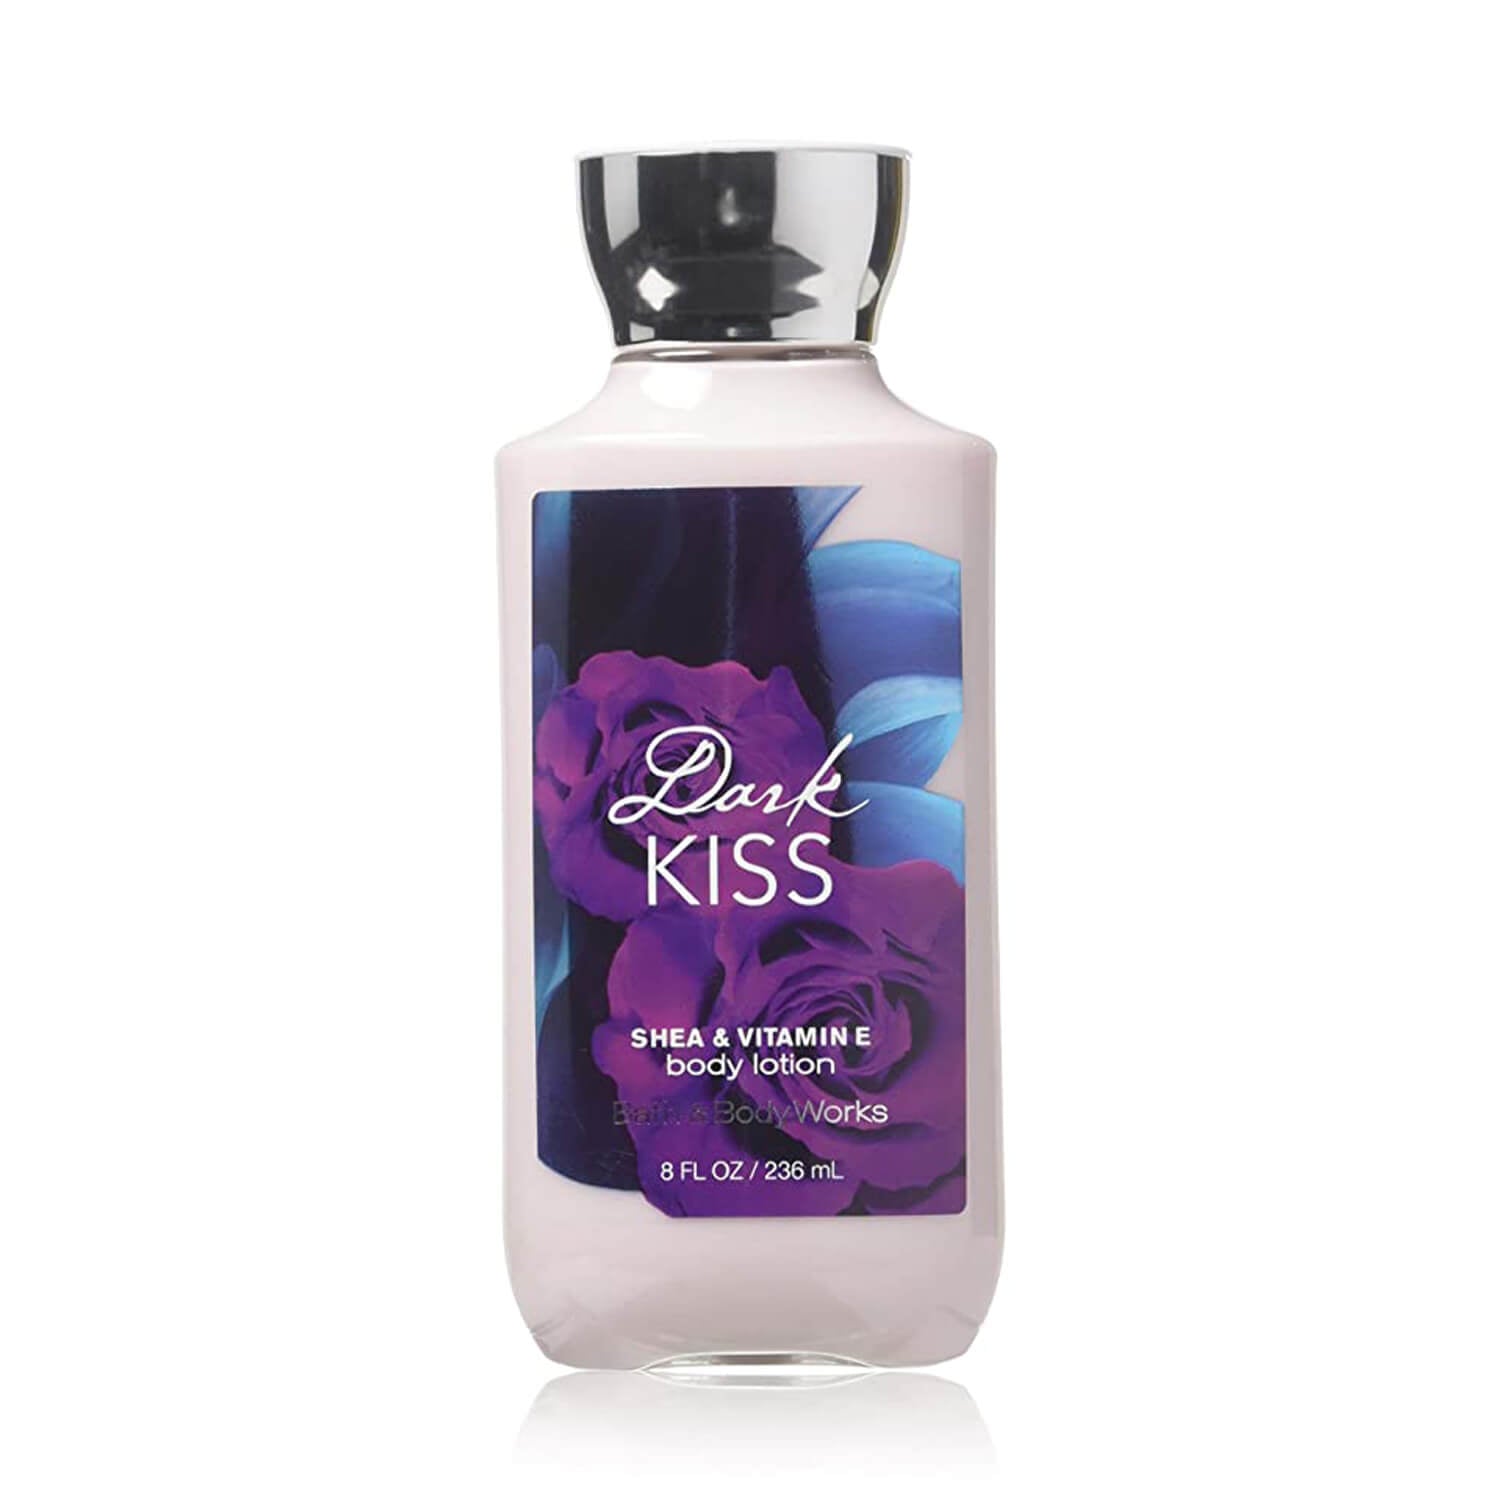 shop bath and body works body lotion in dark kiss fragrance available at heygirl.pk for delivery in Pakistan